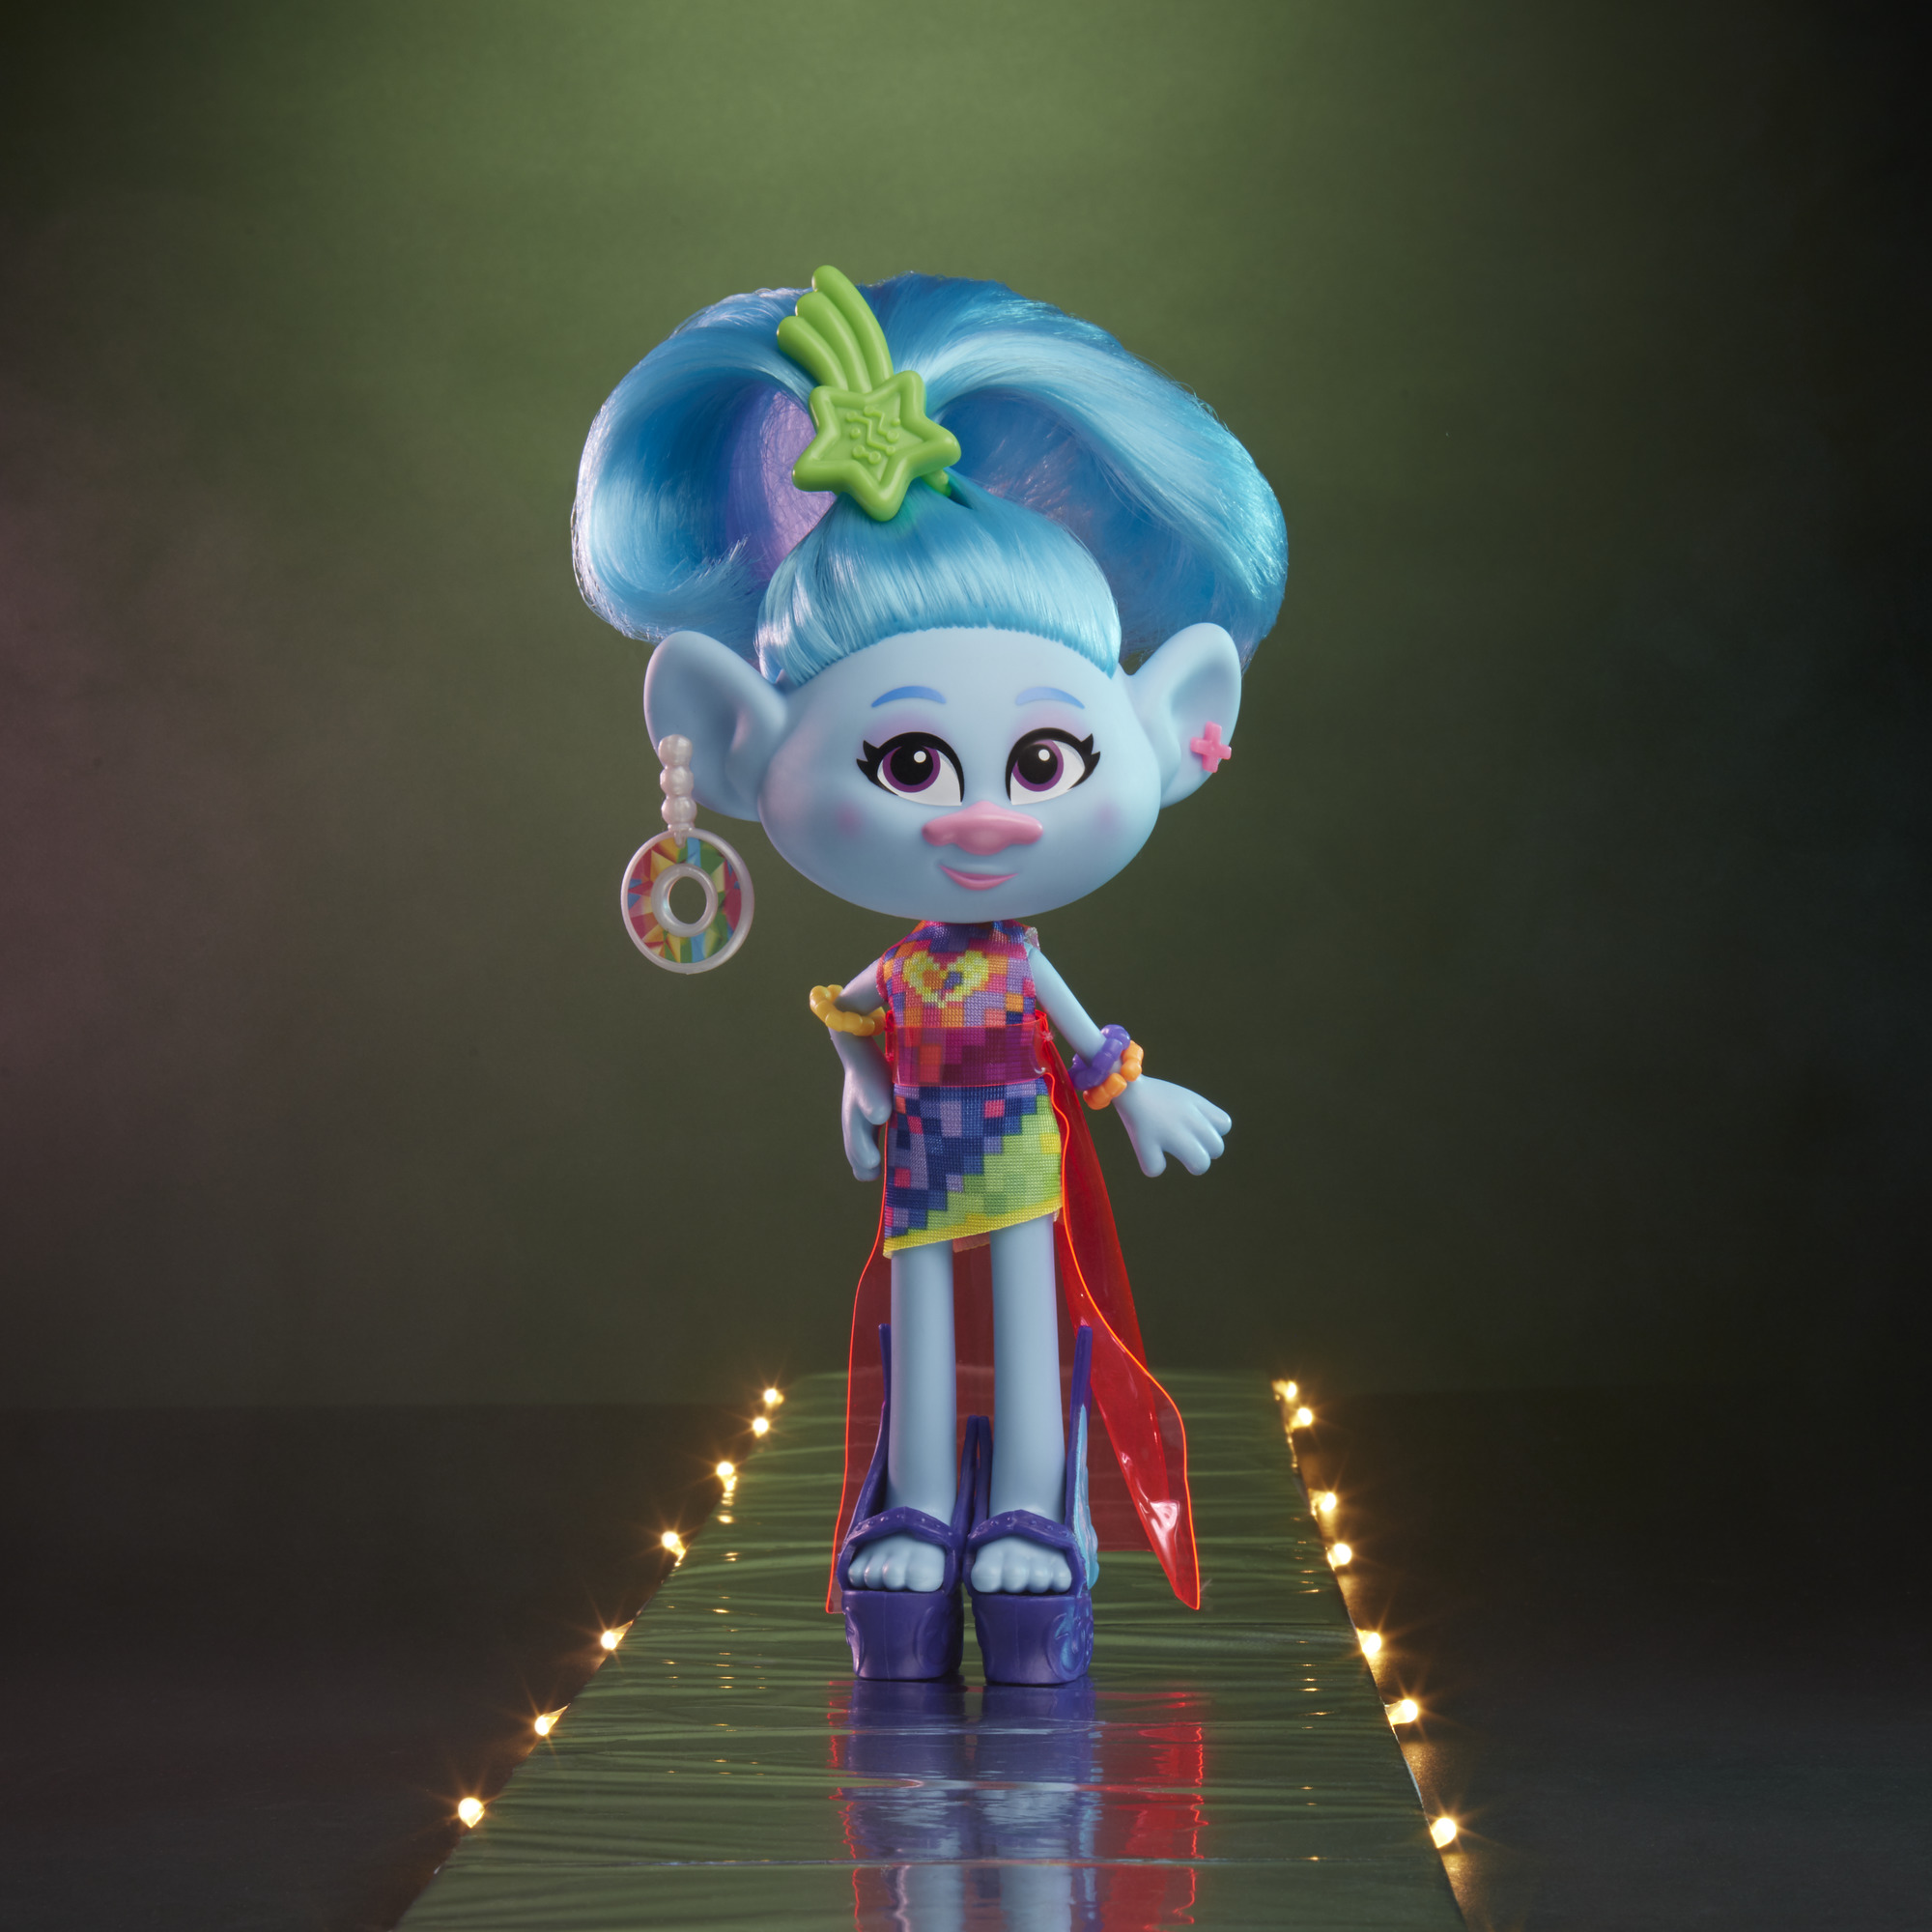 DreamWorks Trolls Glam Chenille Fashion Doll, Includes Dress and Shoes - image 3 of 11